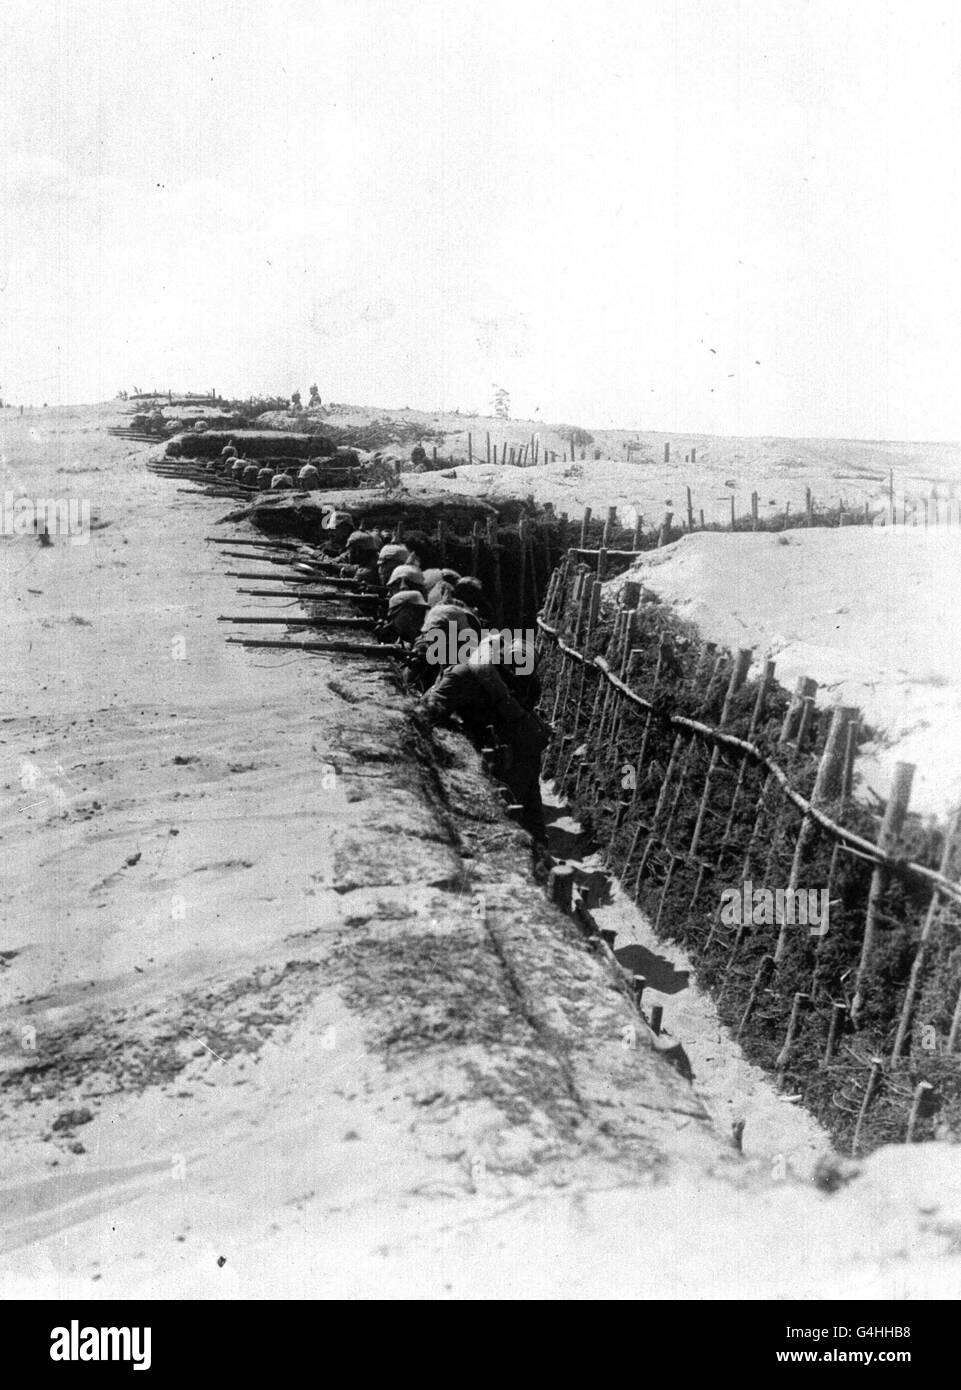 PA NEWS PHOTO 1915 A GERMAN TRENCH IN OCCUPIED POLAND, NEAR IVANGOROD , ON THE EASTERN FRONT DURING THE FIRST WORLD WAR. 1915. 31/07/04: Four veterans of the First World War will travel to the Cenotaph in London to remember the 750,000 British and Commonwealth soldiers who lost their lives during a service to mark the 90th anniversary of the outbreak of the First World War in 1914. Stock Photo